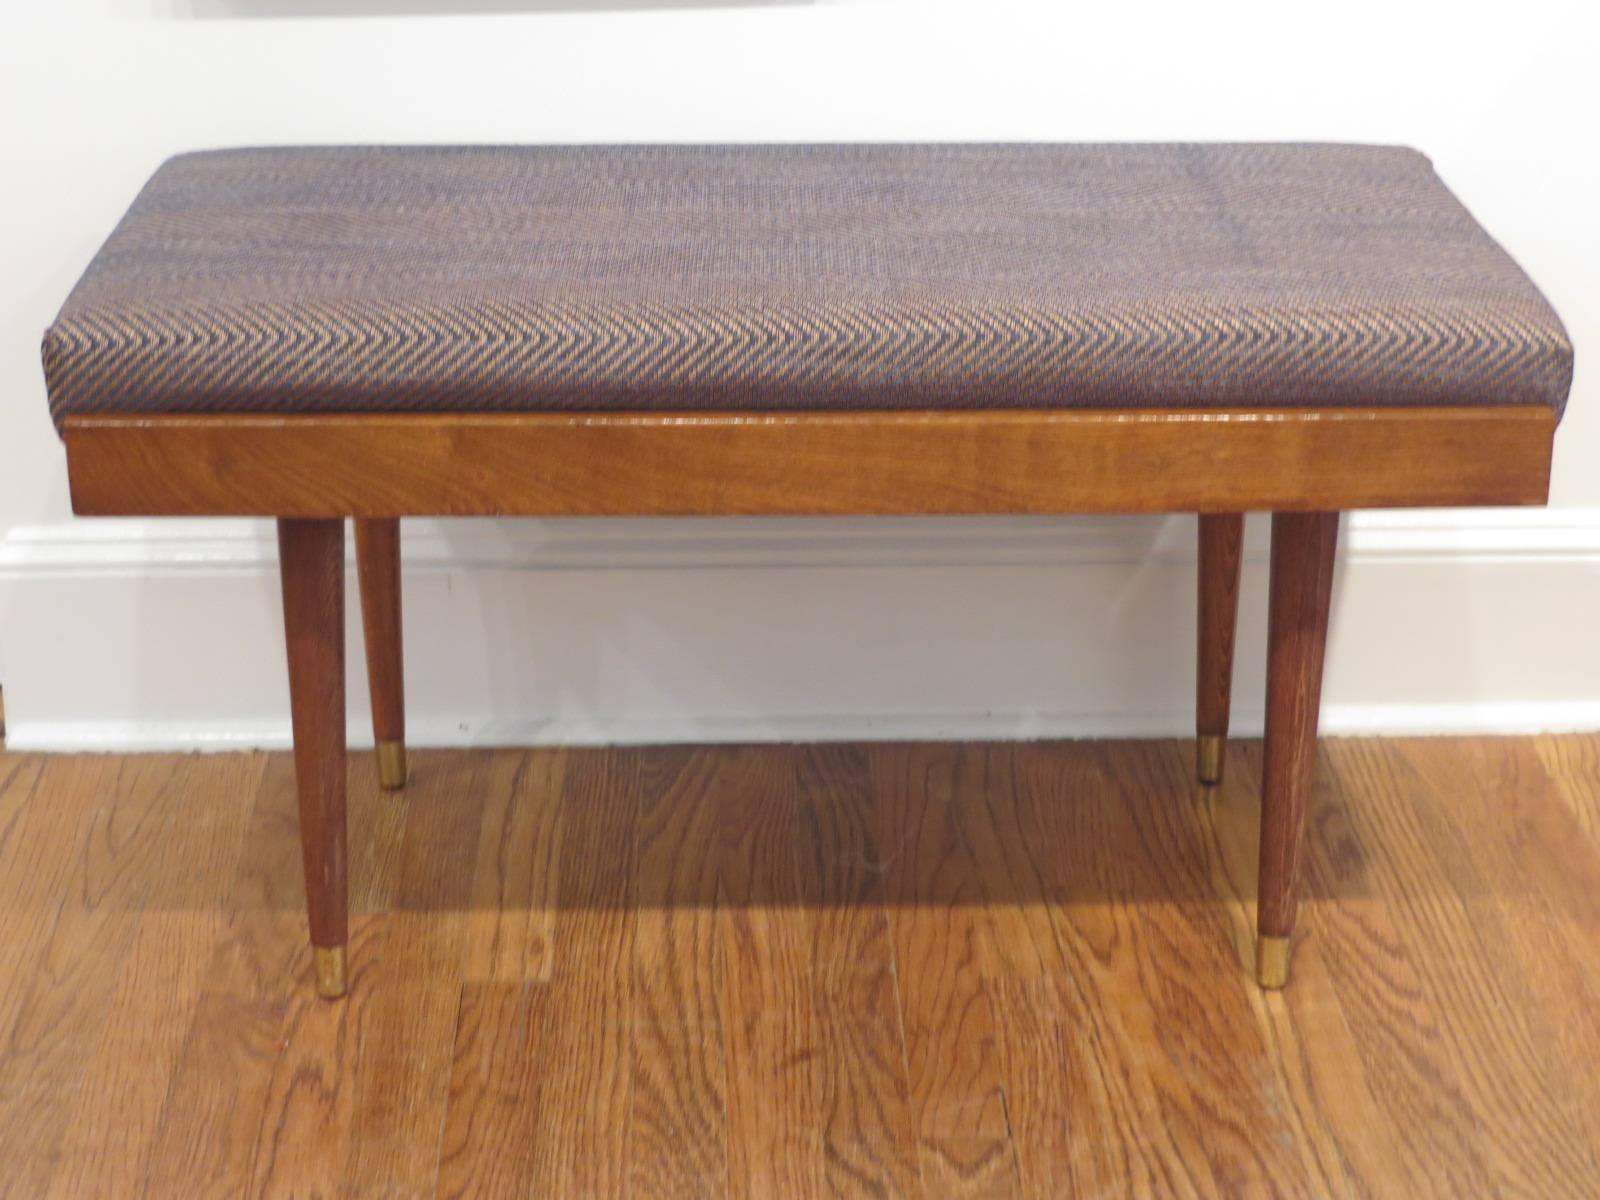 1960s bench recently refinished and reupholstered.
Very easy to change the fabric to your like.
 